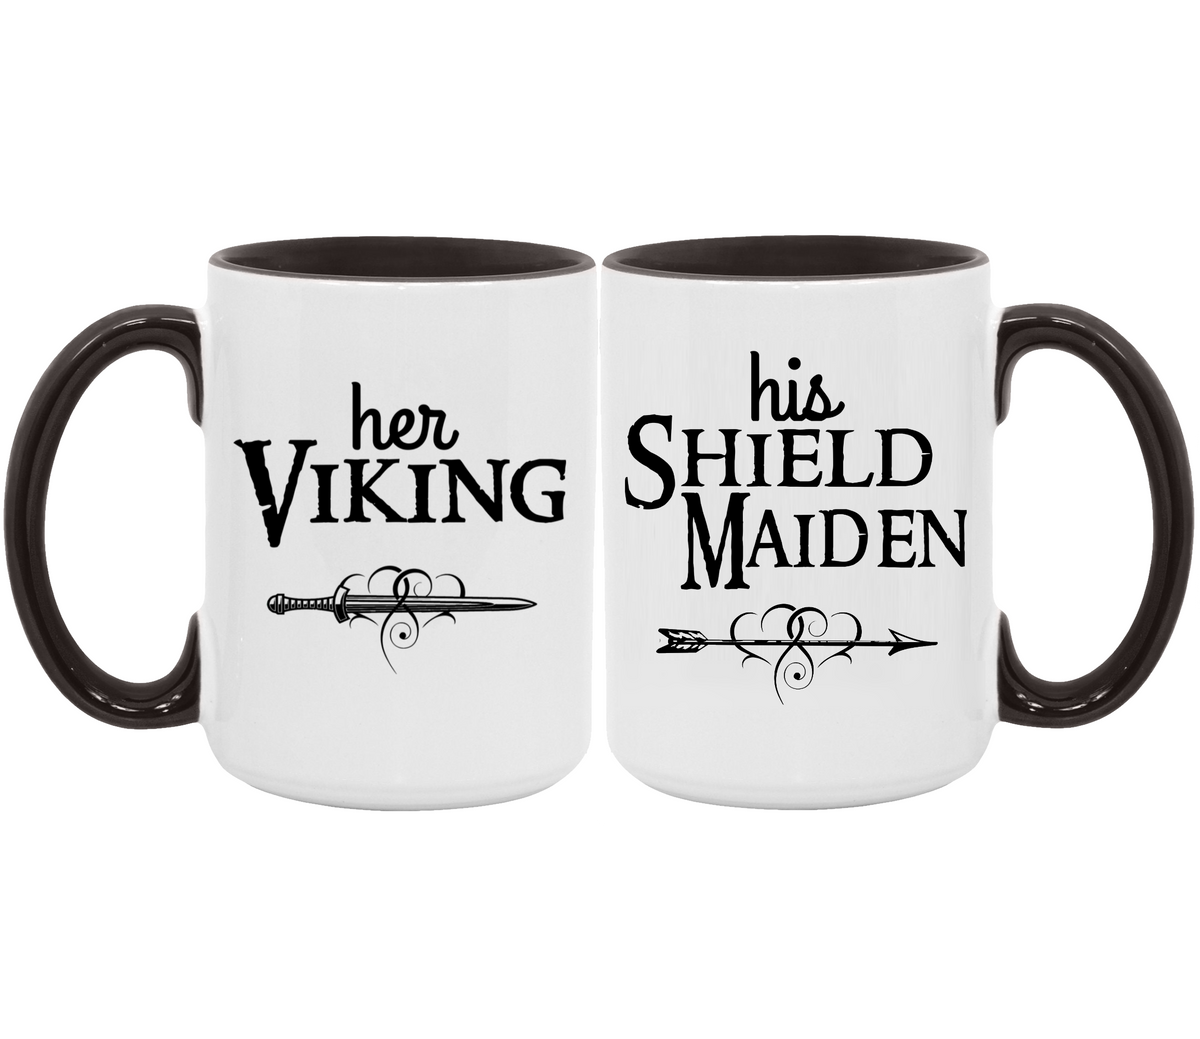 viking couples gifts